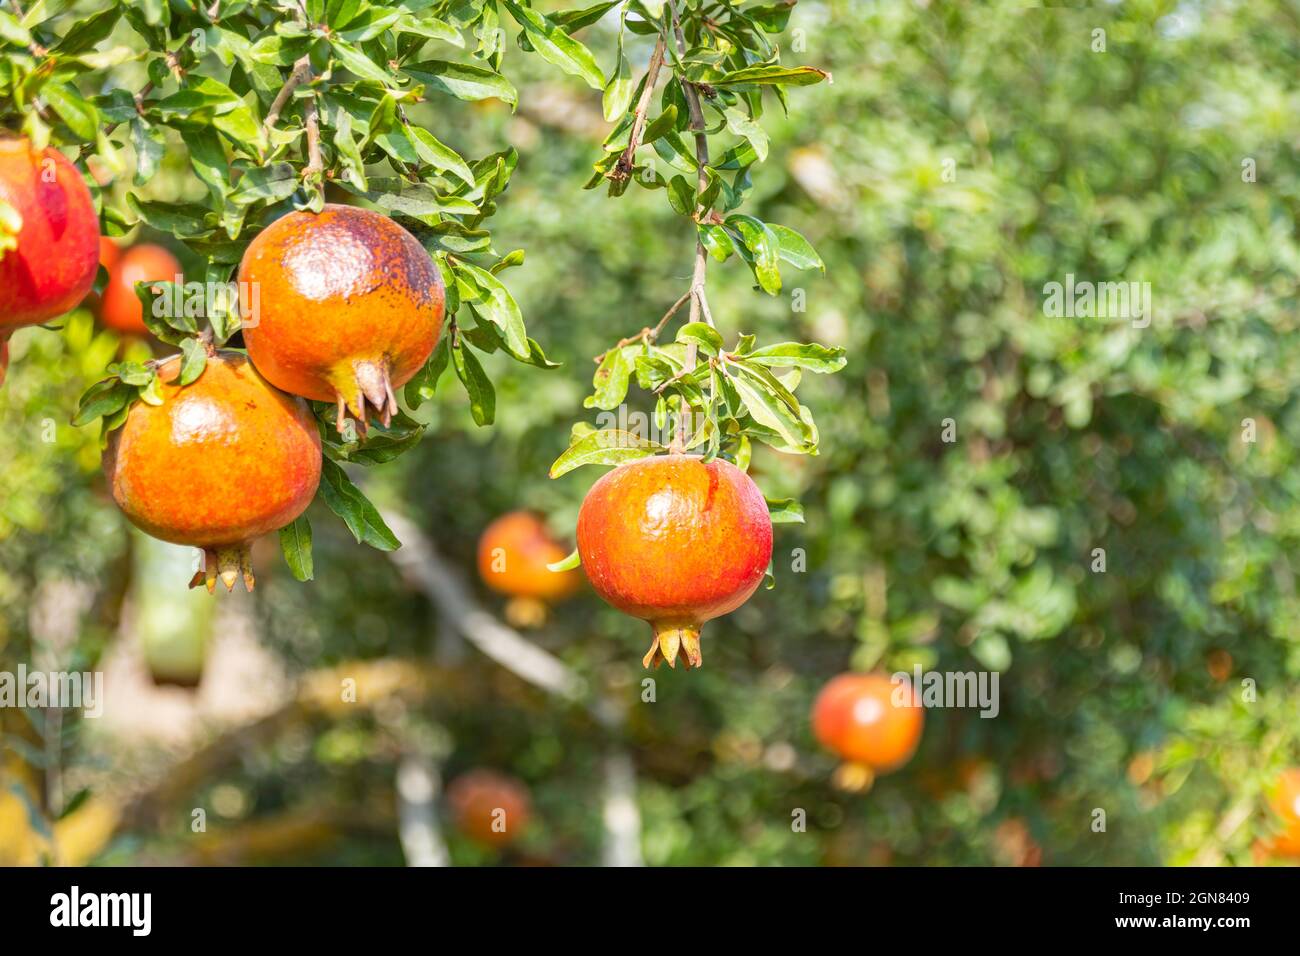 Ripe fruits of pomegranate tree close-up hanging on branches. Israel Stock Photo